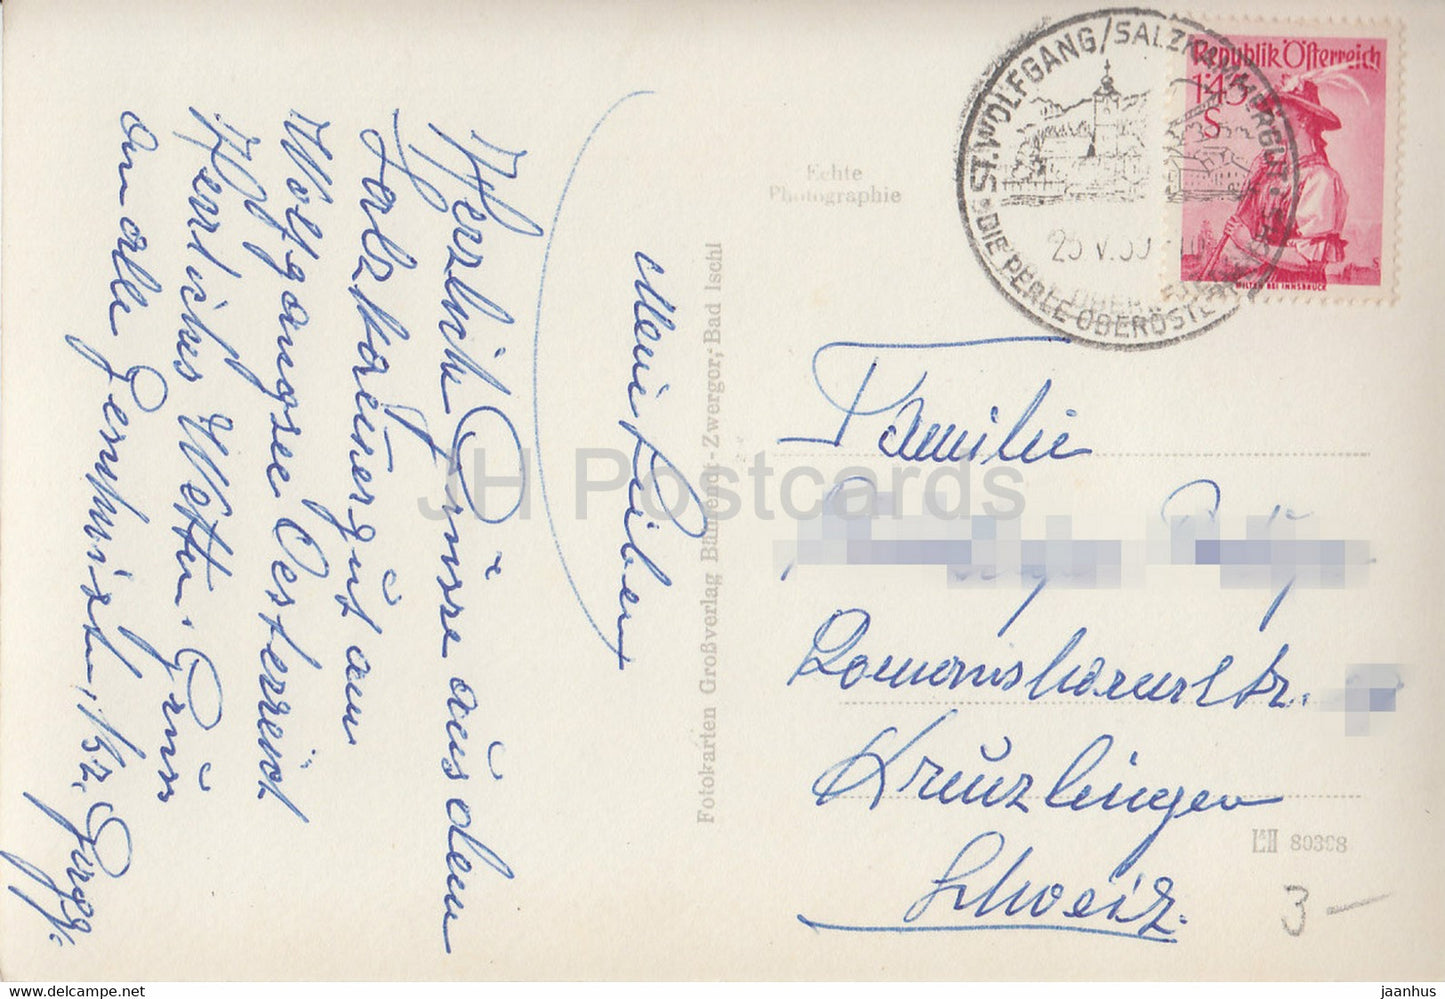 St Wolfgang - 4030 - old postcard - Austria - used